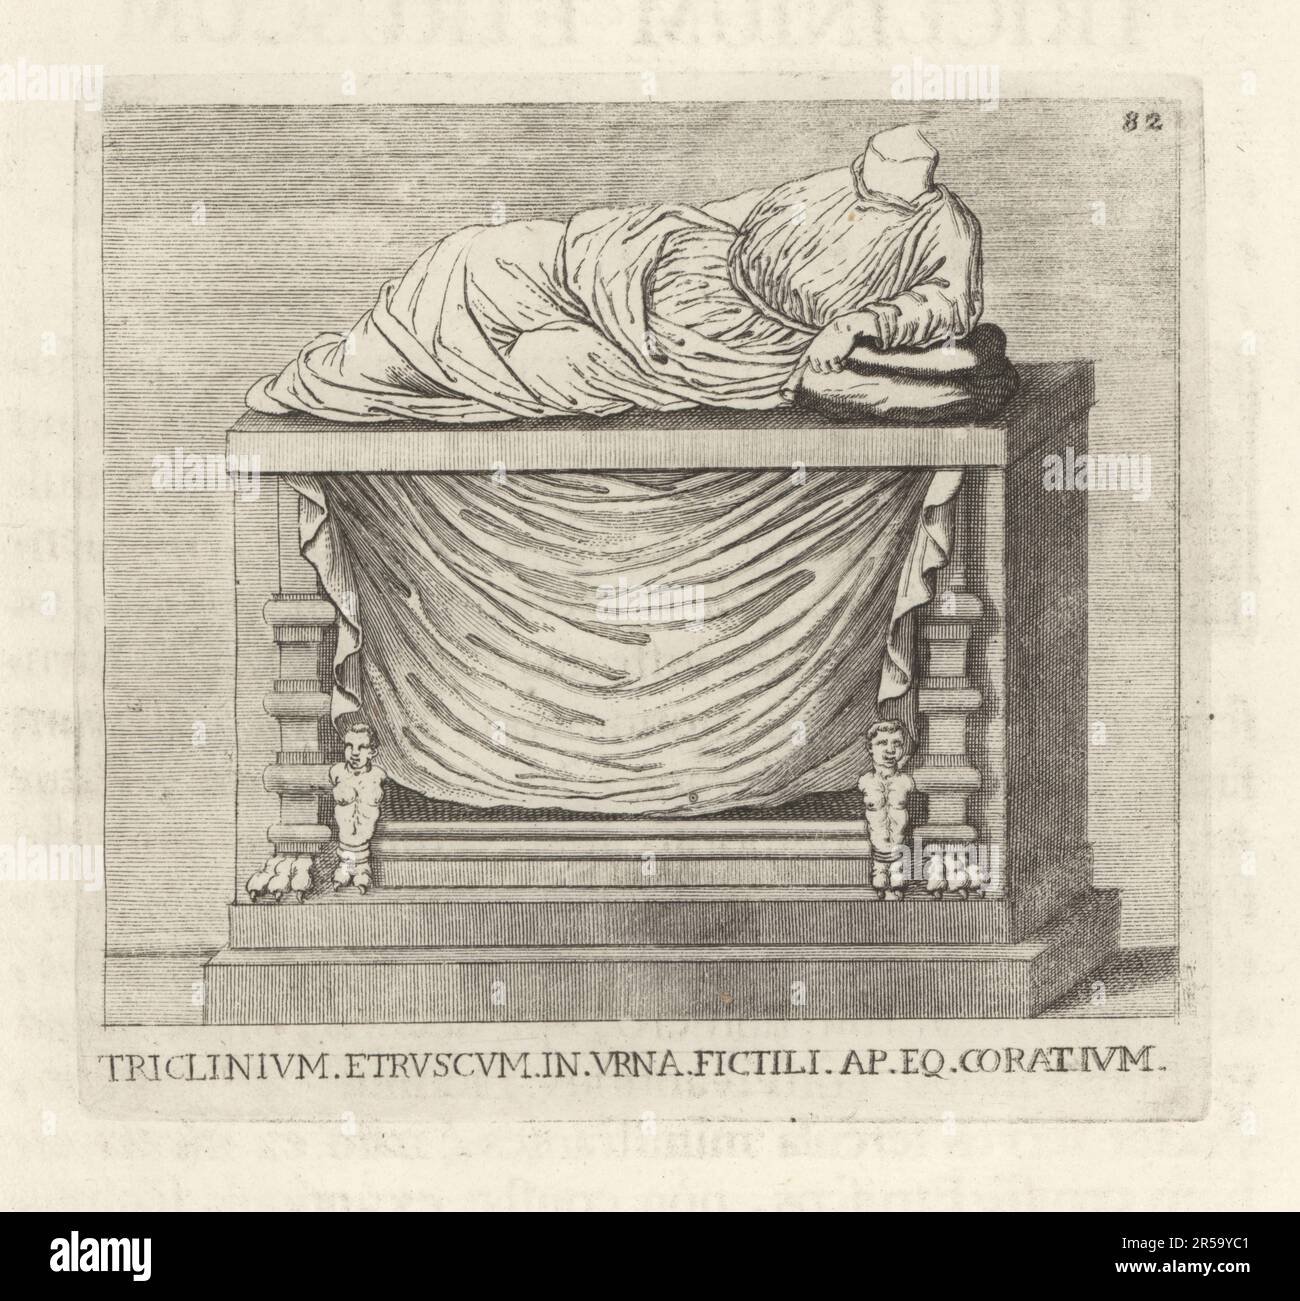 An Etruscan triclinium or dining room. A woman reclining on a bed in a dining room furnished with rich cushions and curtains. From an urn the Museum of the Knights of the Order of Saint Stephen, Cortona Triclinium Etruscum in Urna Fictili ap Eq. Coratium. Copperplate engraving from Francesco Valesio, Antonio Gori and Ridolfino Venuti’s Academia Etrusca, Museum Cortonense in quo Vetera Monumenta, (Etruscan Academy or Museum of Cortona), Faustus Amideus, Rome, 1750. Stock Photo